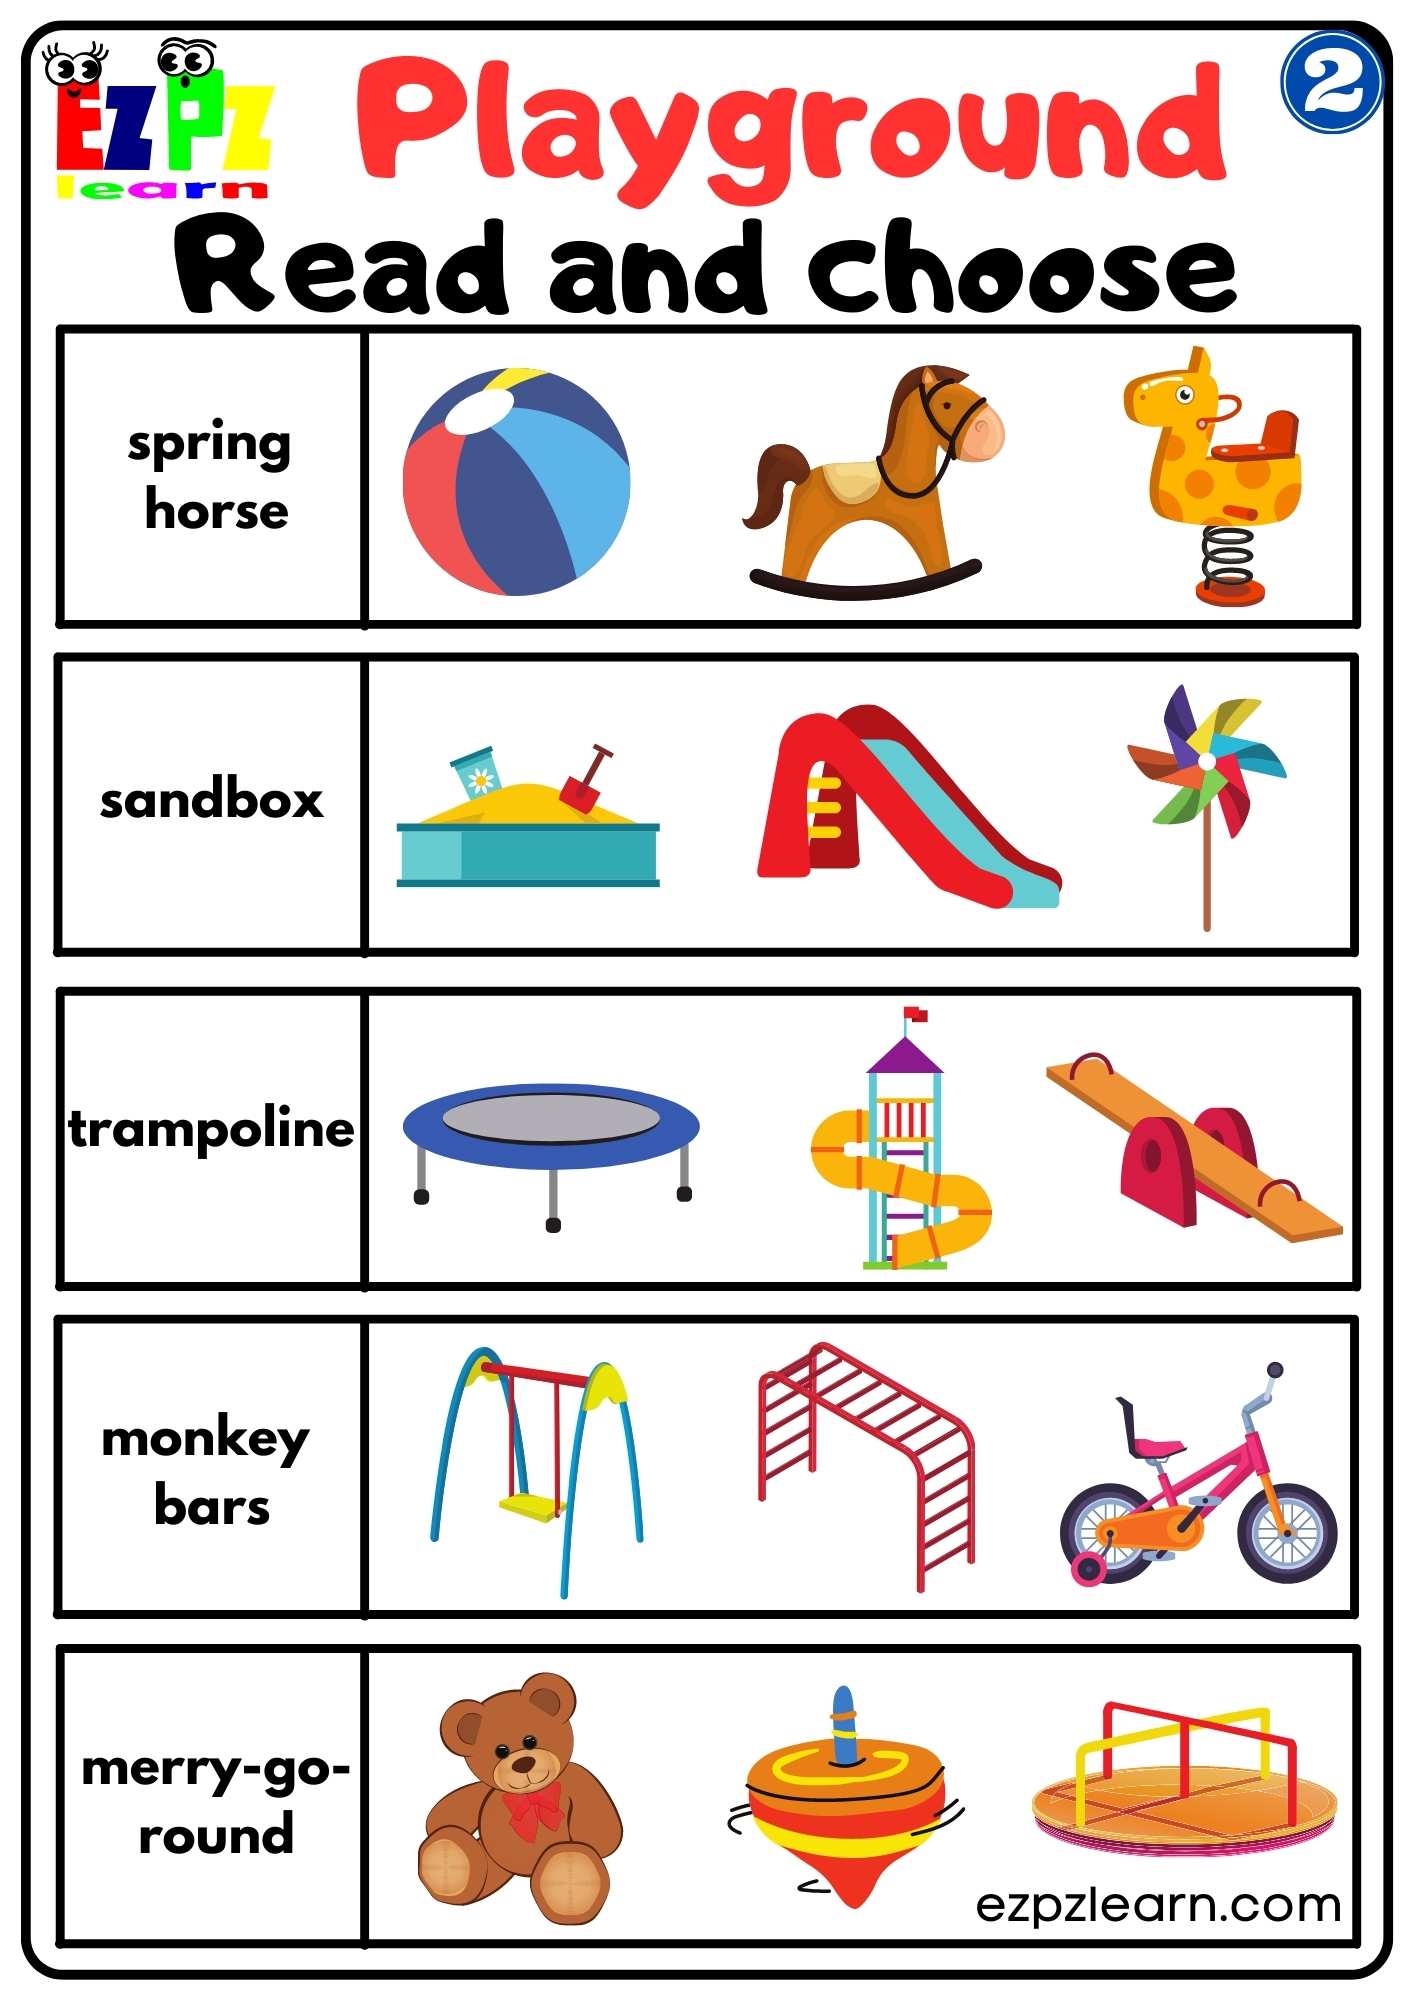 playground-vocabulary-2-read-and-choose-worksheet-for-kindergarten-and